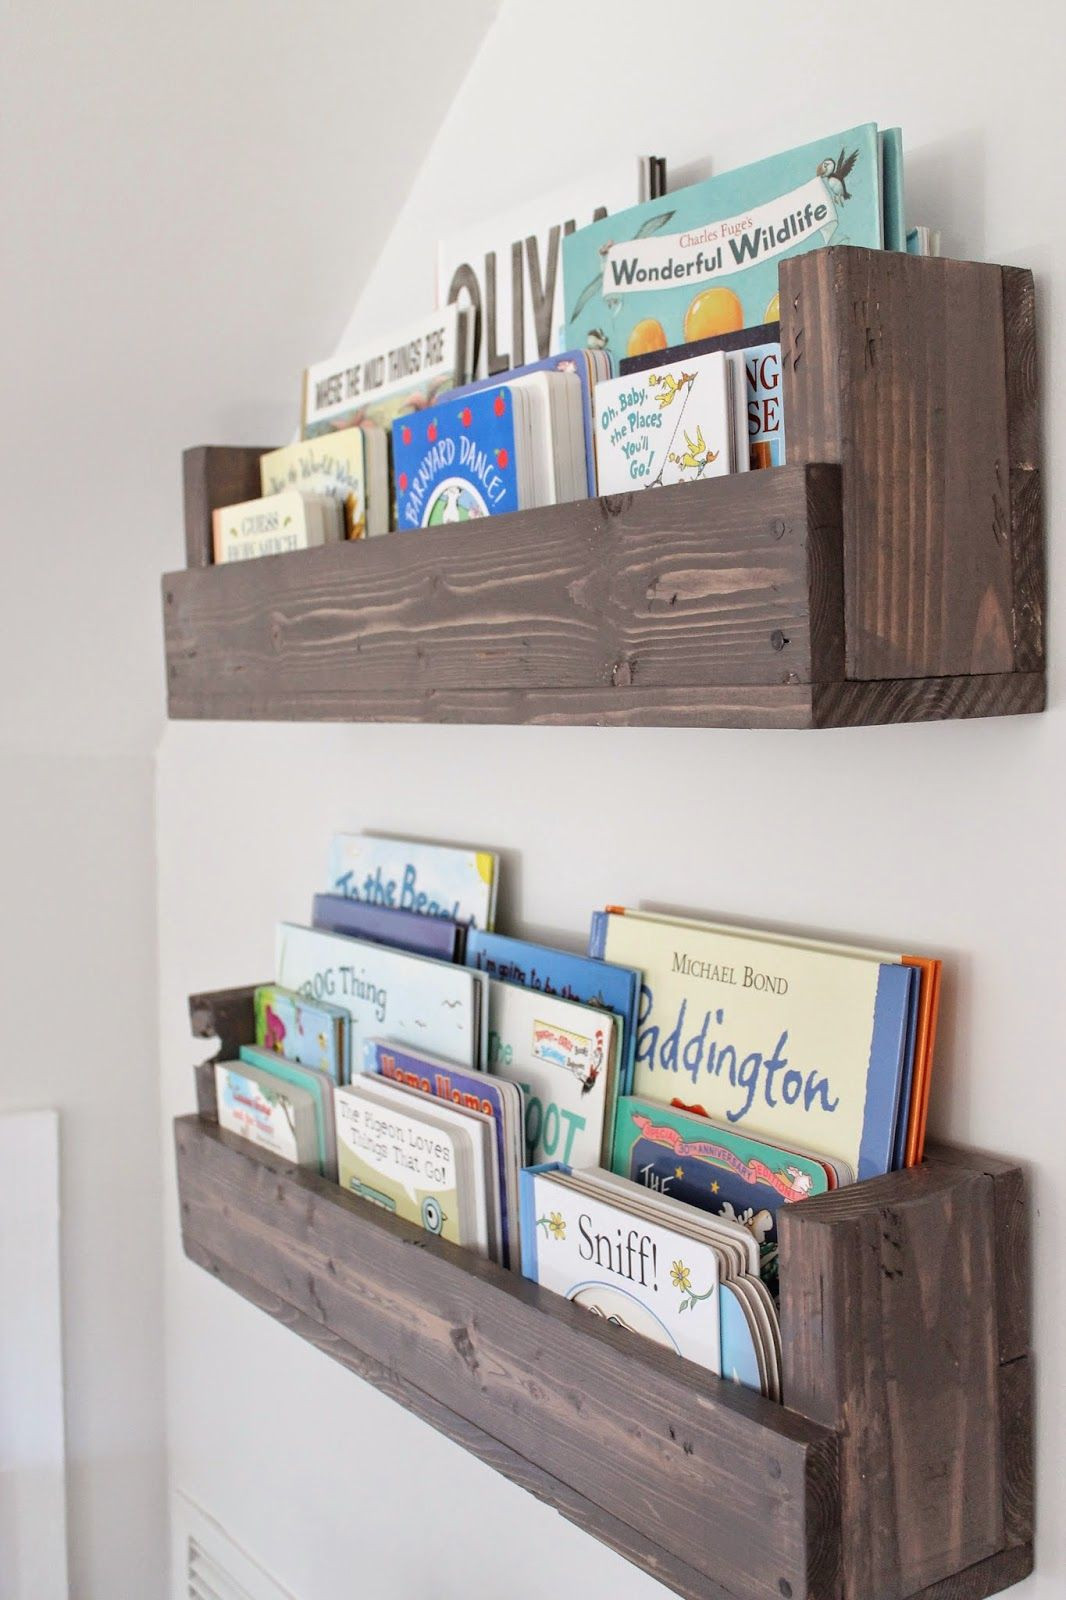 DIY Baby Bookshelf
 See how Caitlin from The Picket Fence Projects whipped up